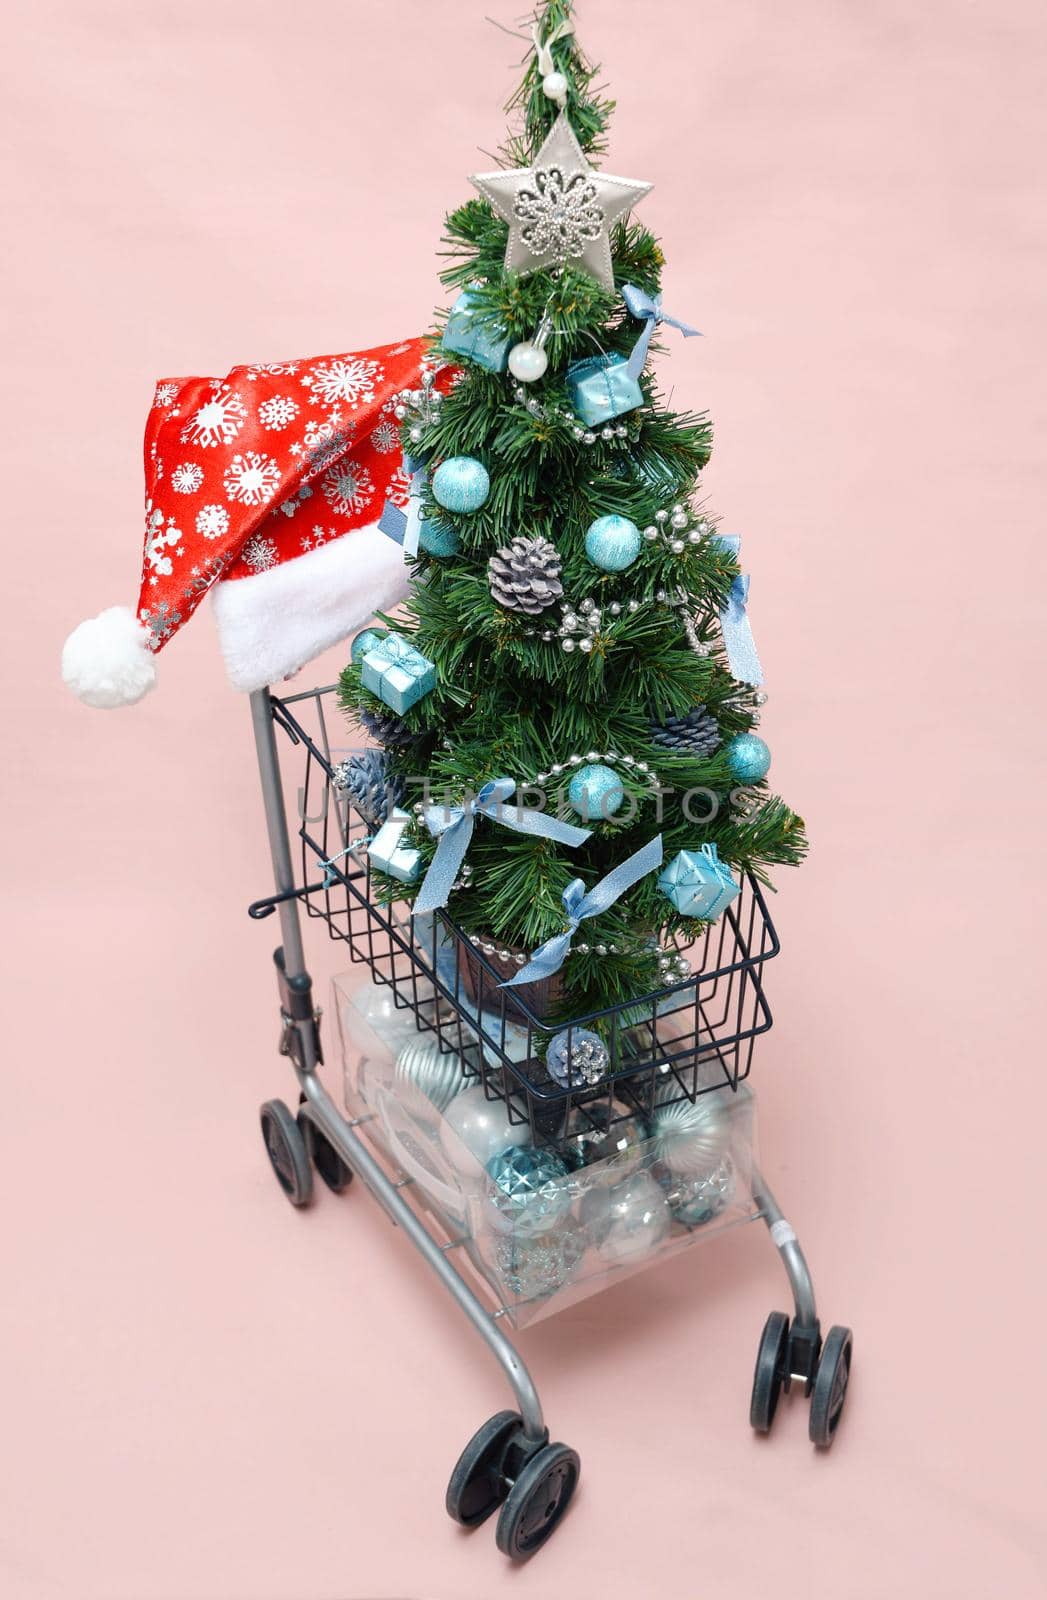 Christmas mini tree with blue balls in shopping carts,new year shopping by KaterinaDalemans